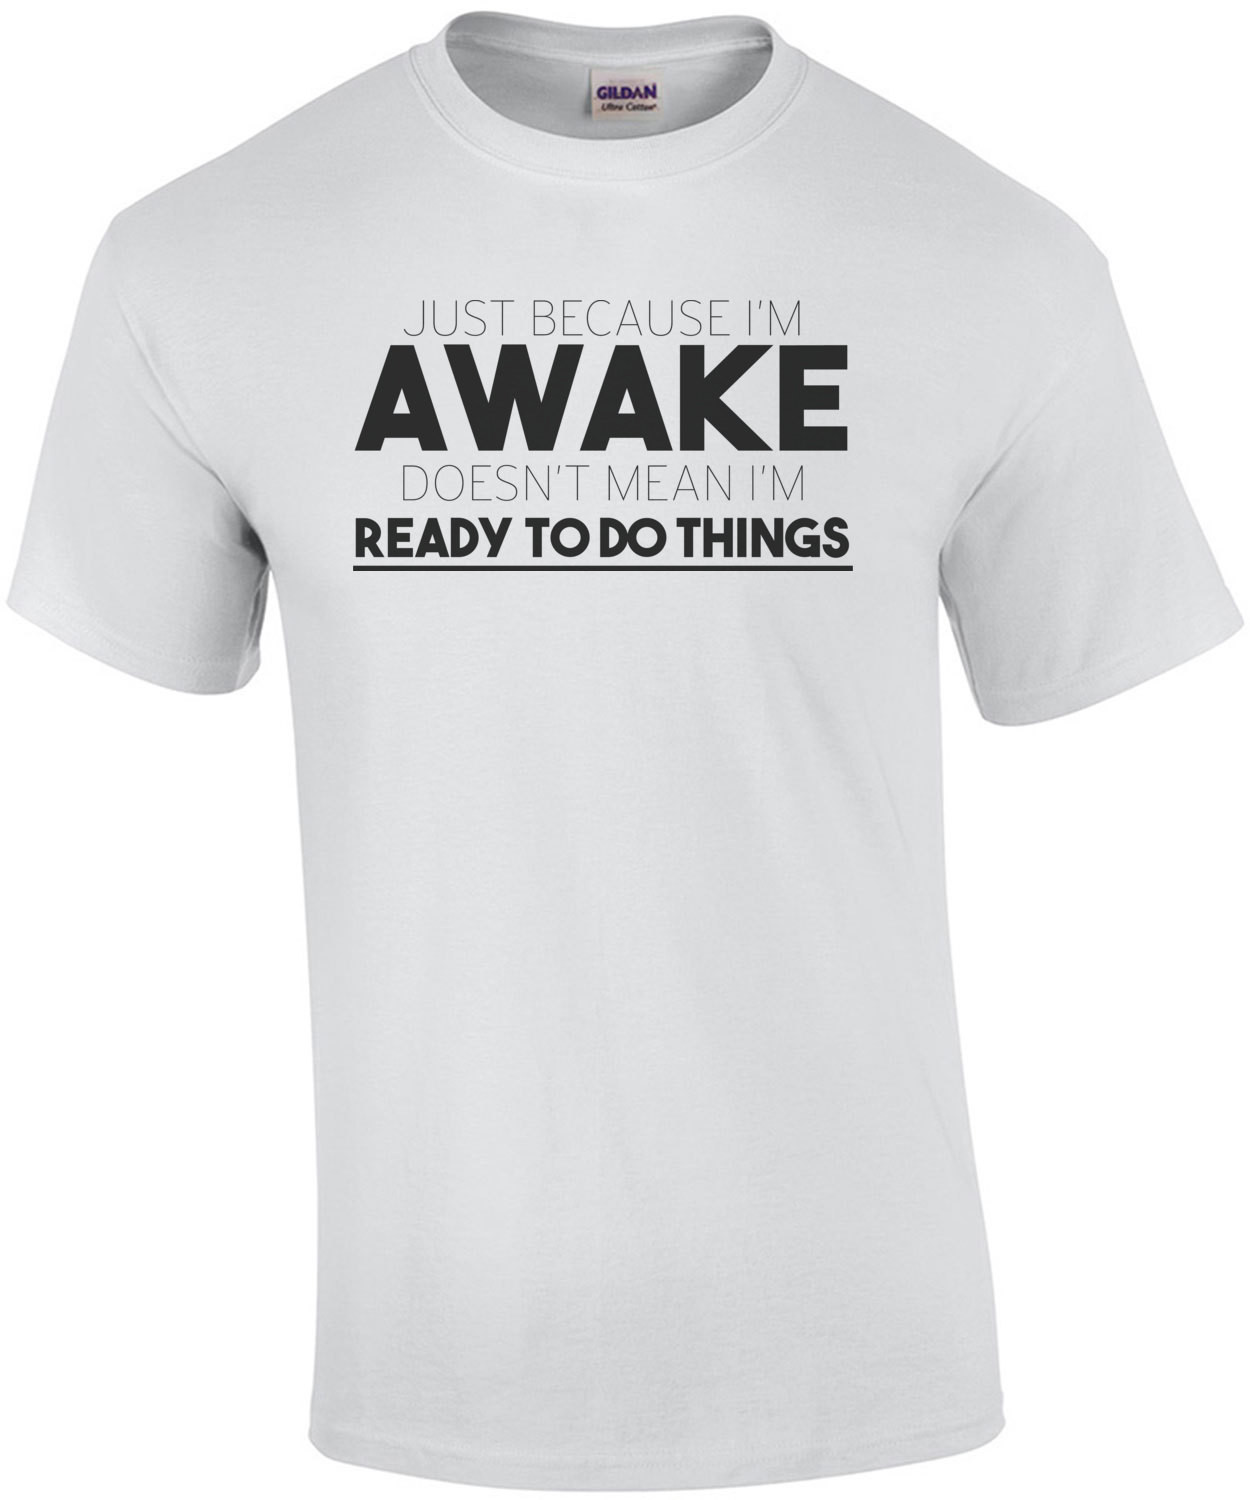 Just because I'm awake doesn't mean I'm ready to do things t-shirt